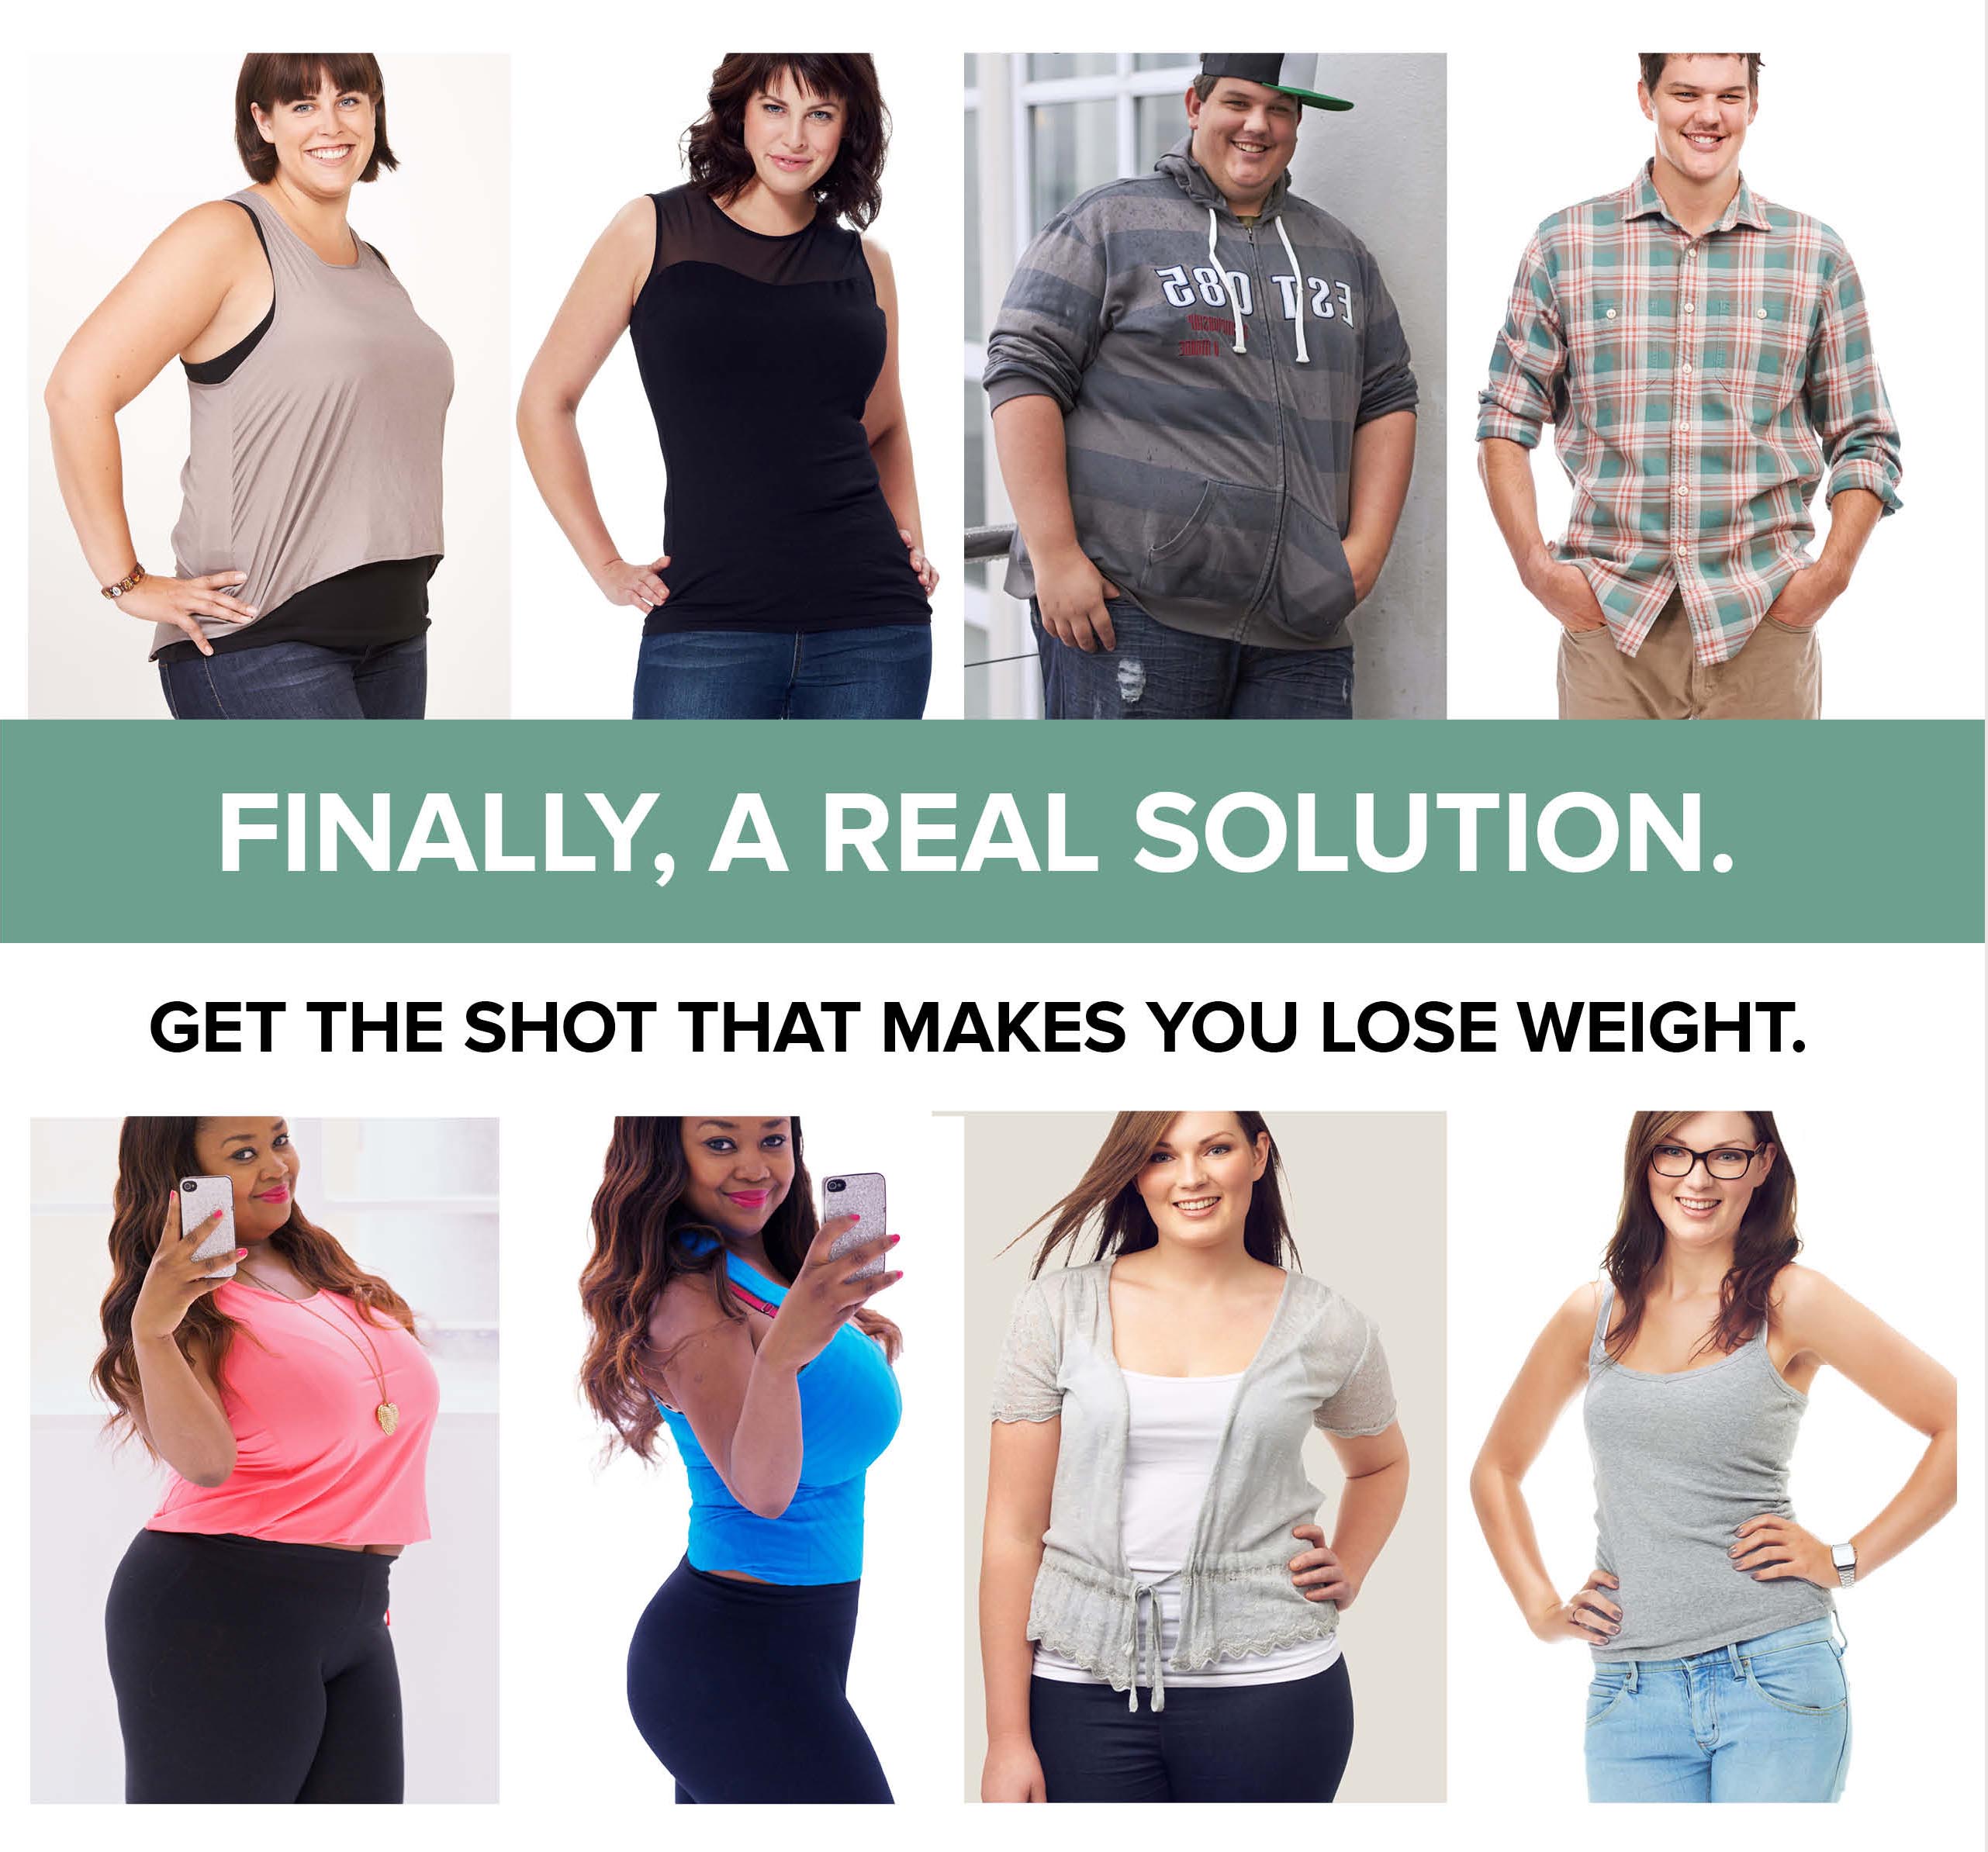 Lussier Weight Loss Real Solution, get the shot that makes you lose weight.